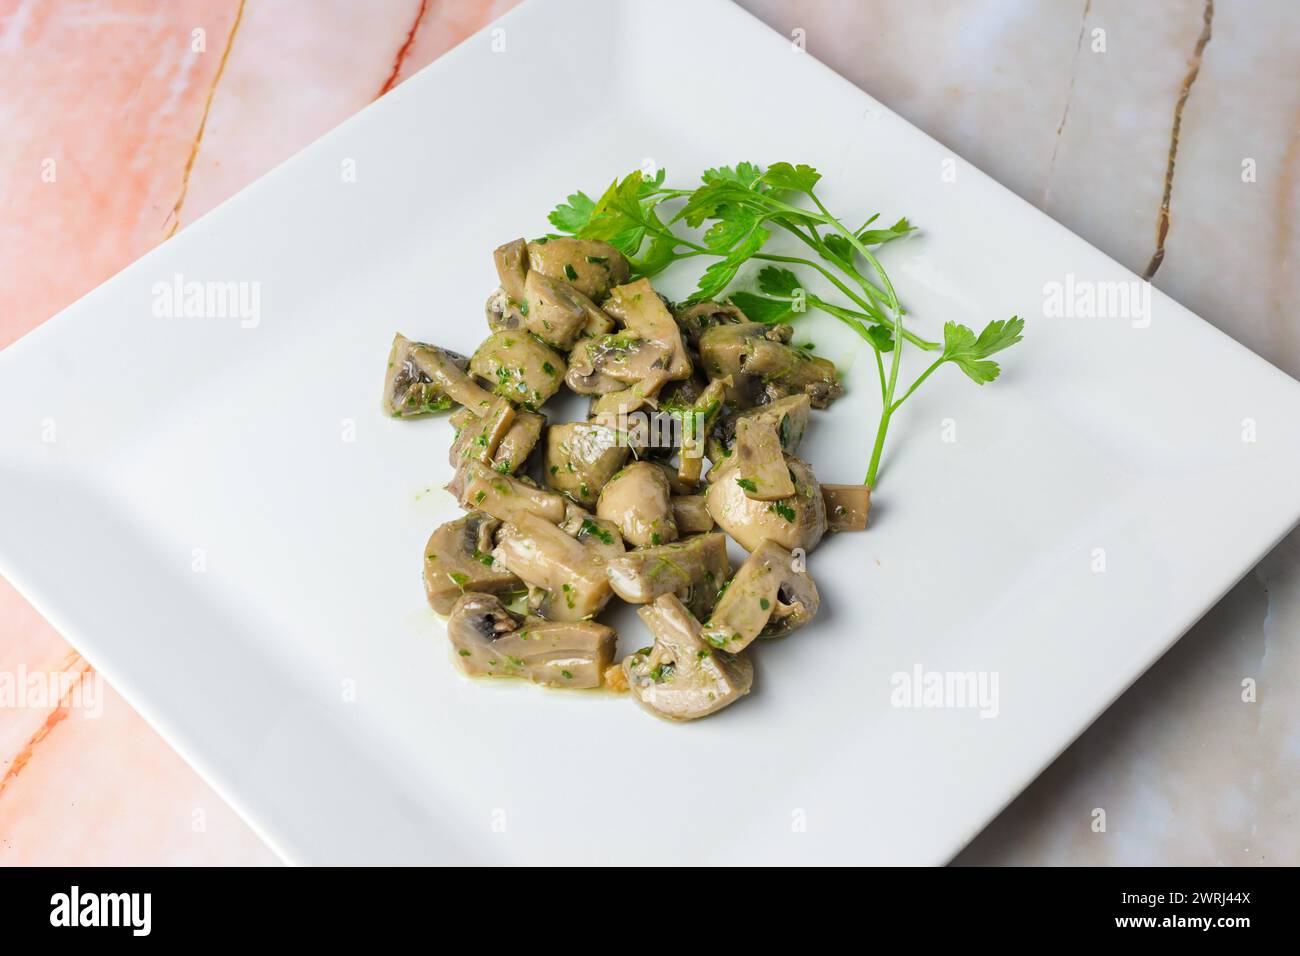 Herb-marinated mushrooms with parsley on a square white plate, typical food, typical mediterranean mallorcan cuisine typical from balearic islands Stock Photo